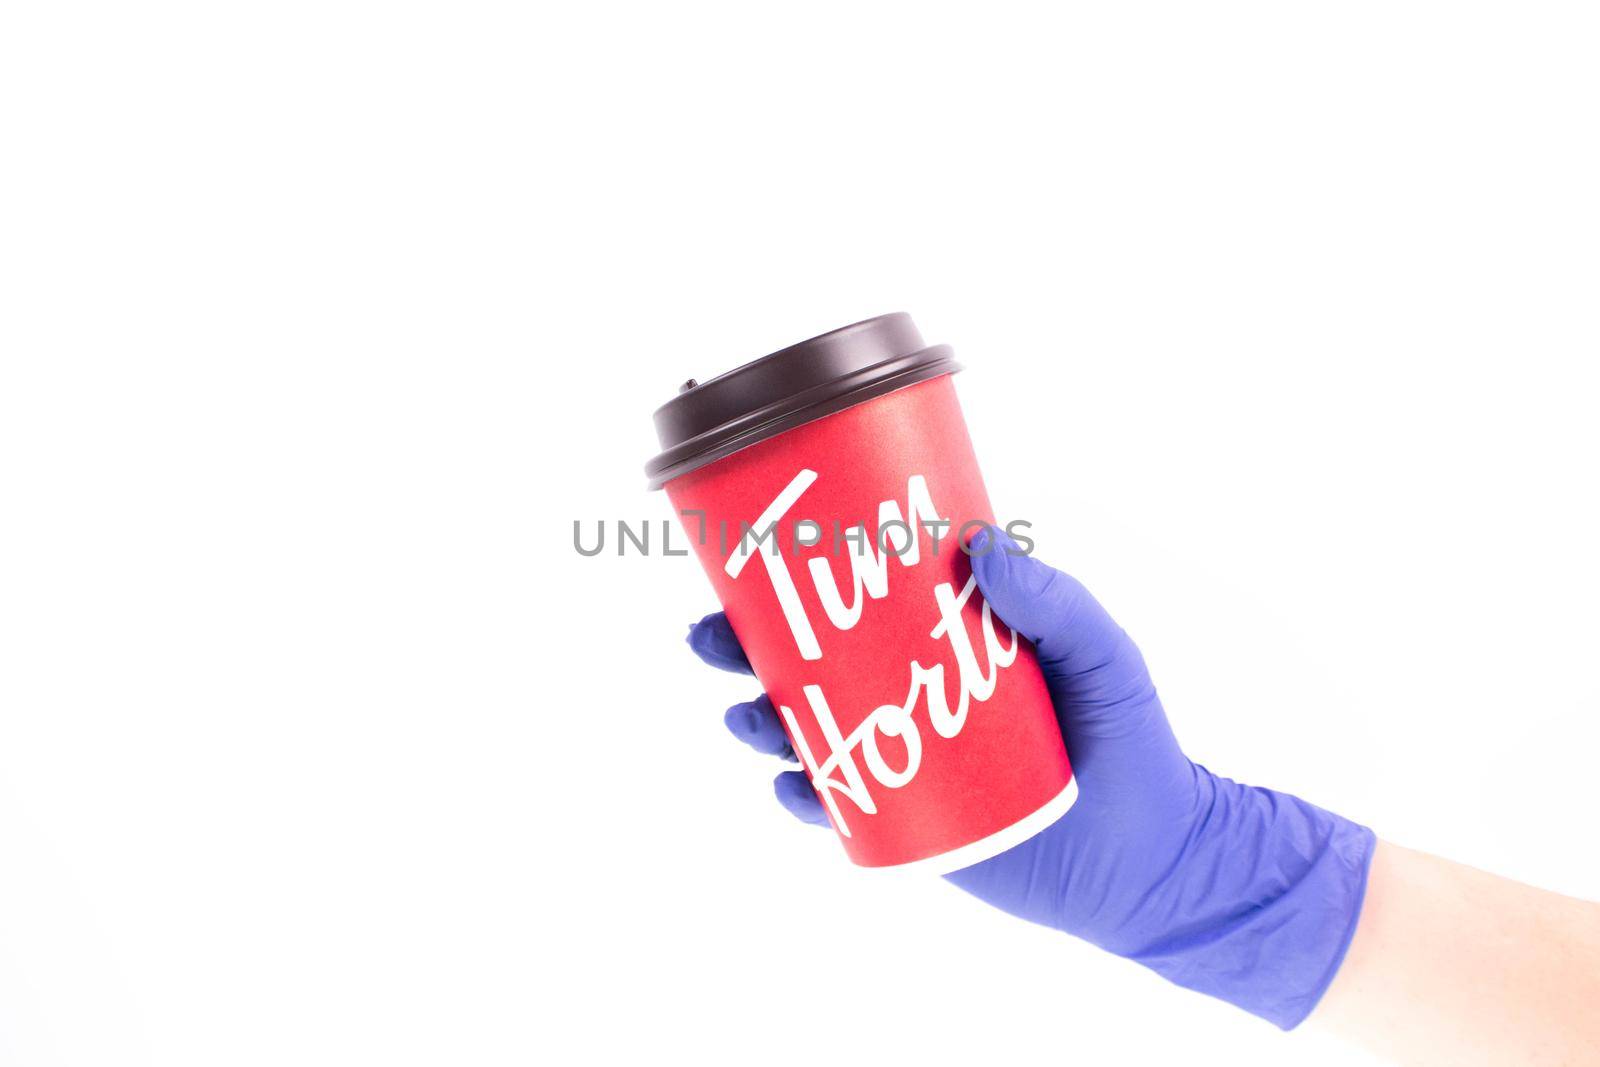 Nurse hand in medical glove holding a Tim Hortons Large Cup of Coffee. Red Tims coffee cup. Gatineau, Quebec, Canada August 4, 2022.